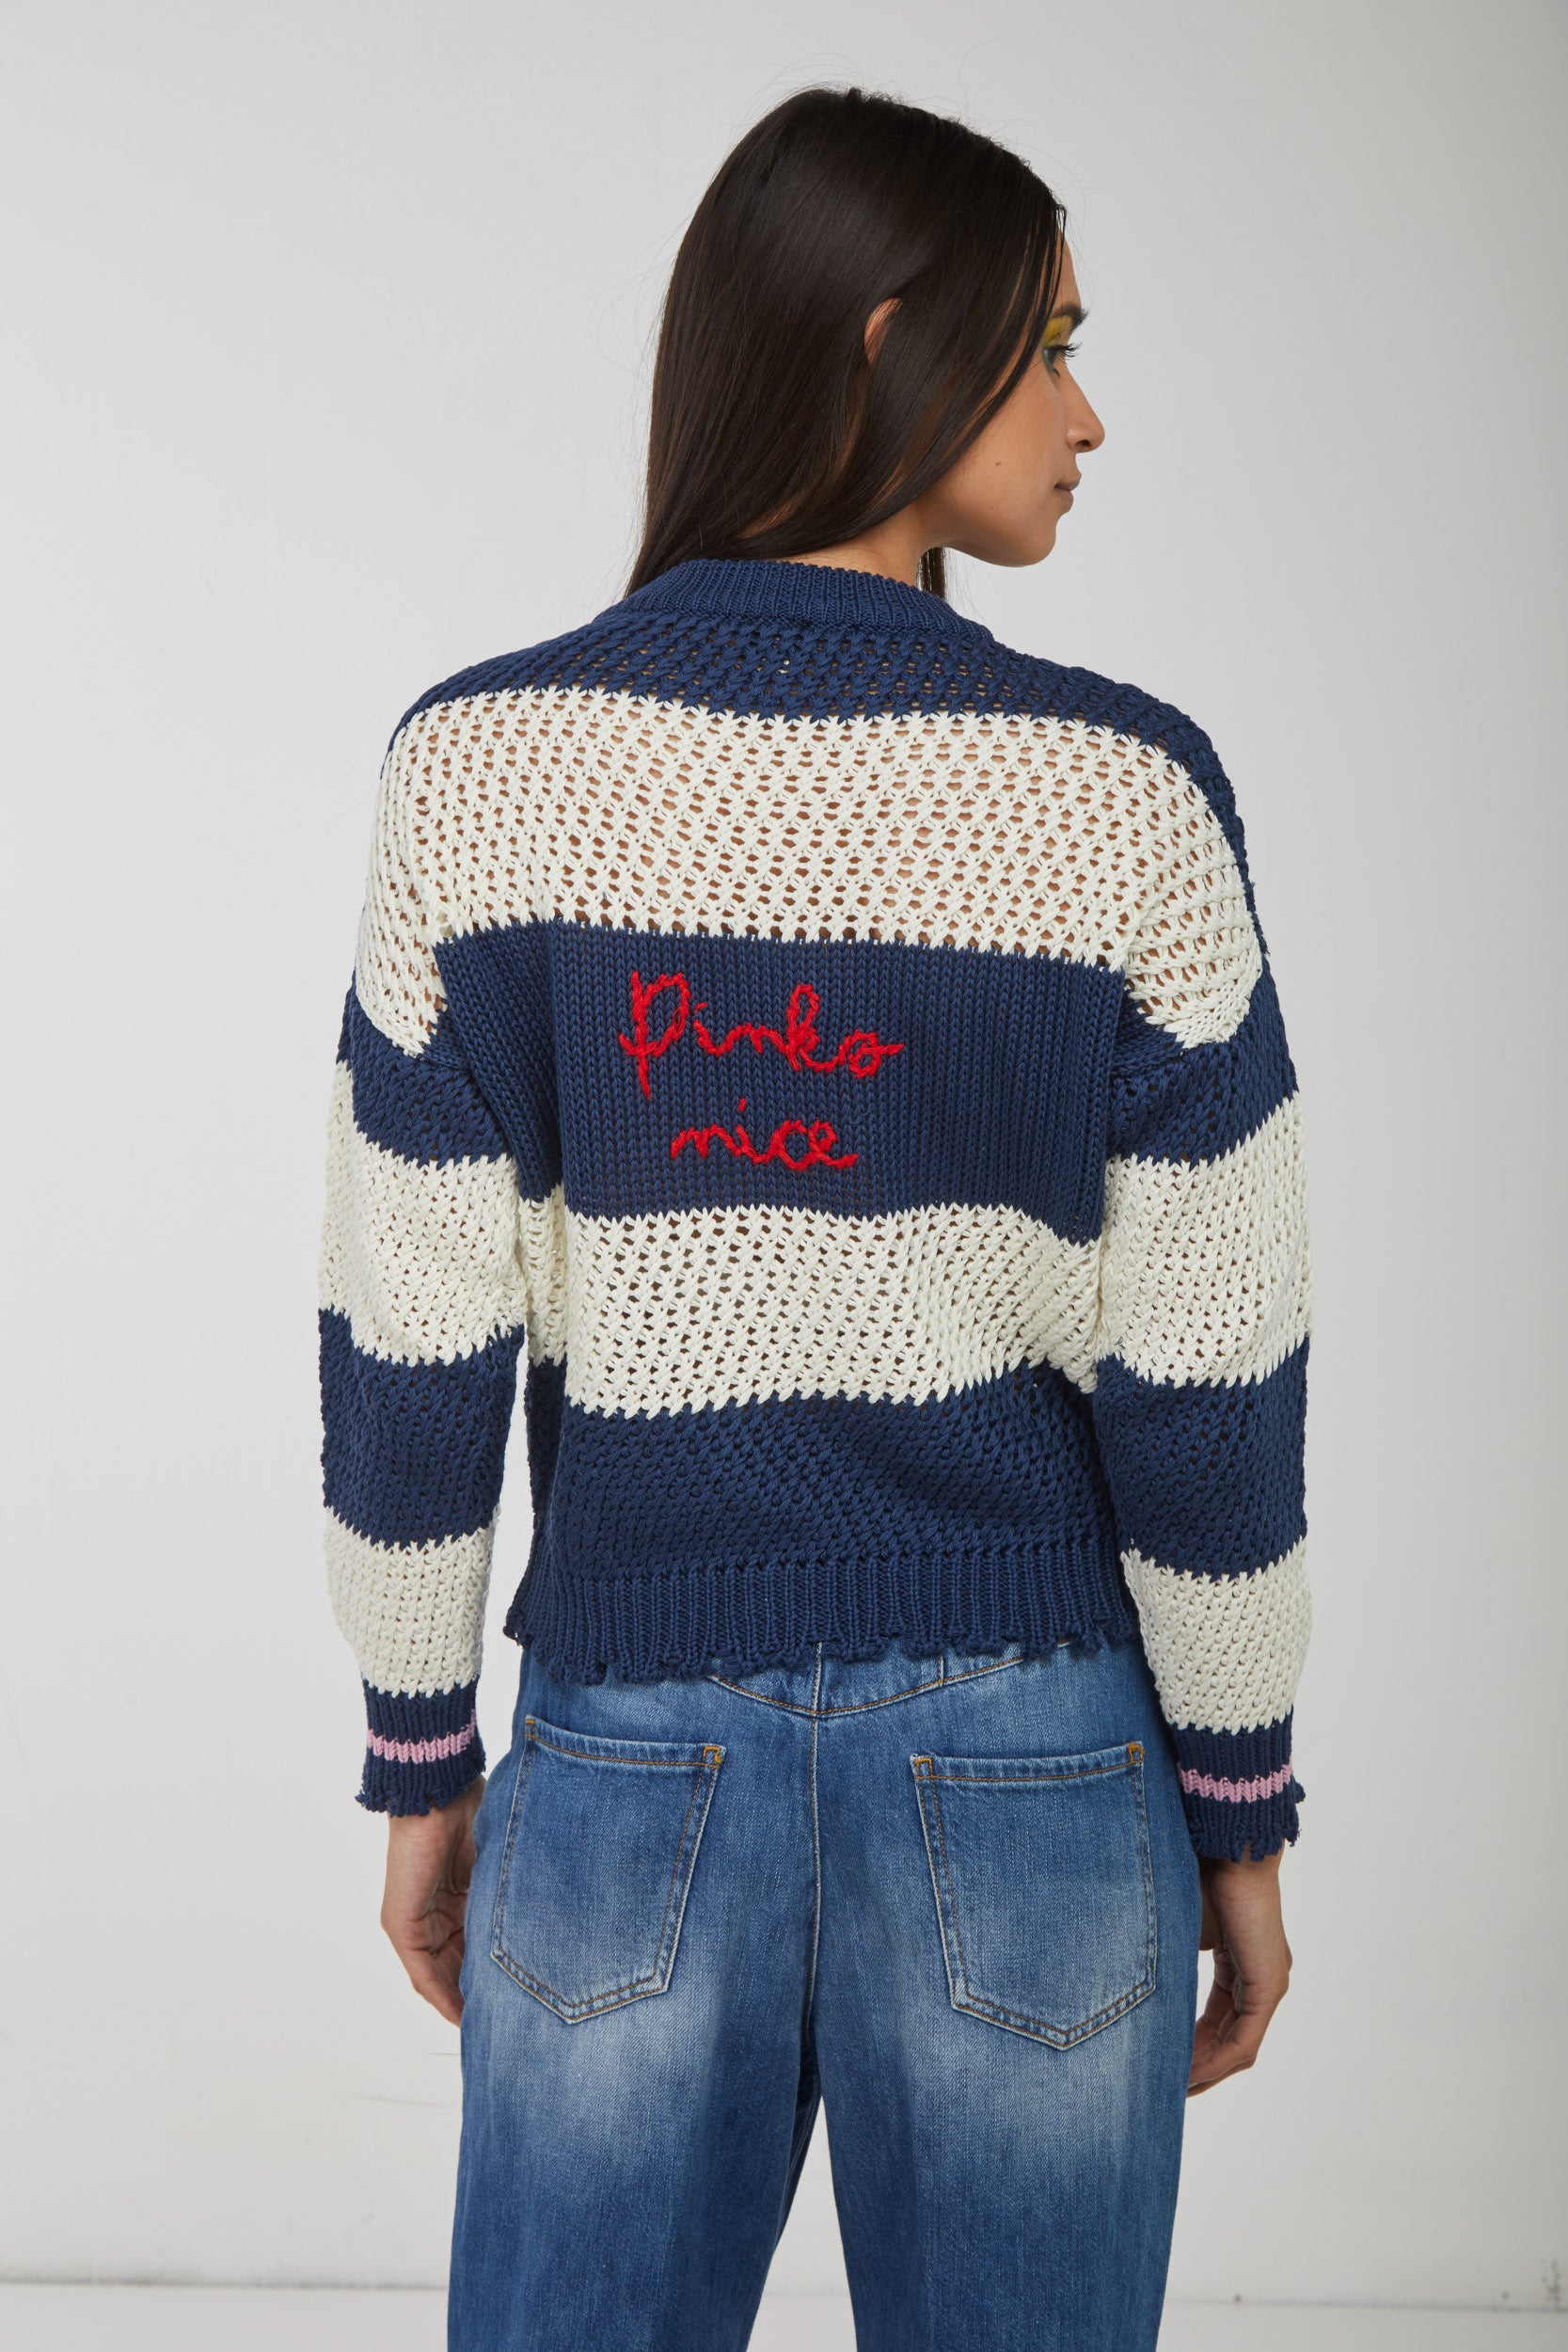 PINKO Blue and White "C'est So Nice" Sweater